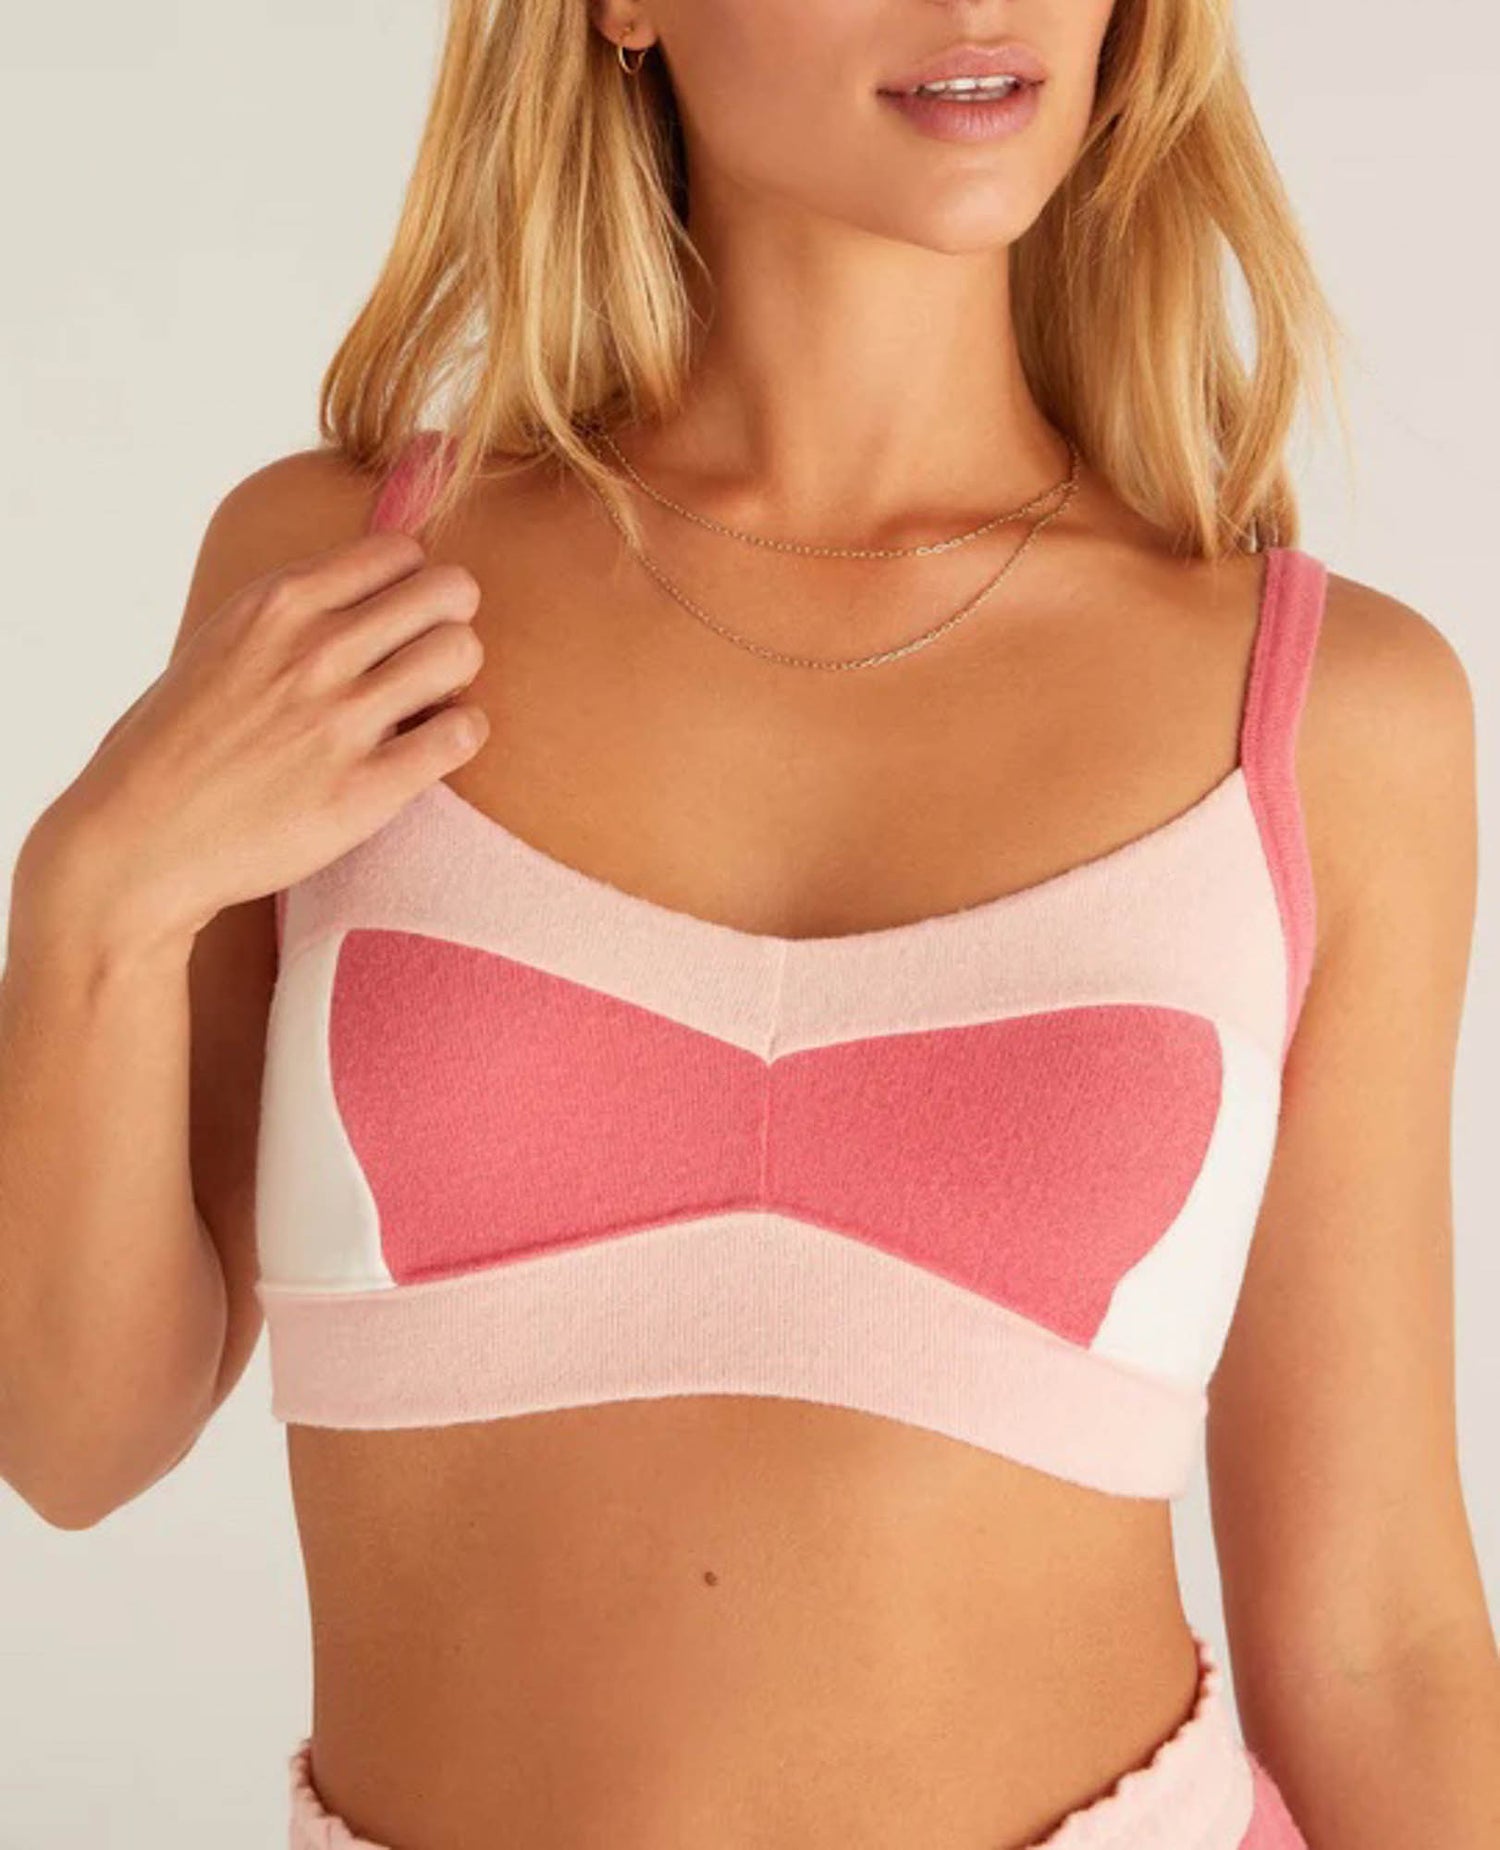 Z Supply Mix Color Tank Bra Look pretty in pink in this cute color block tank bra! This tank bra is made of ultra soft brushed sweater knit fabric and features a unique and flattering design that's to die for! Pair it with matching joggers to complete the look!